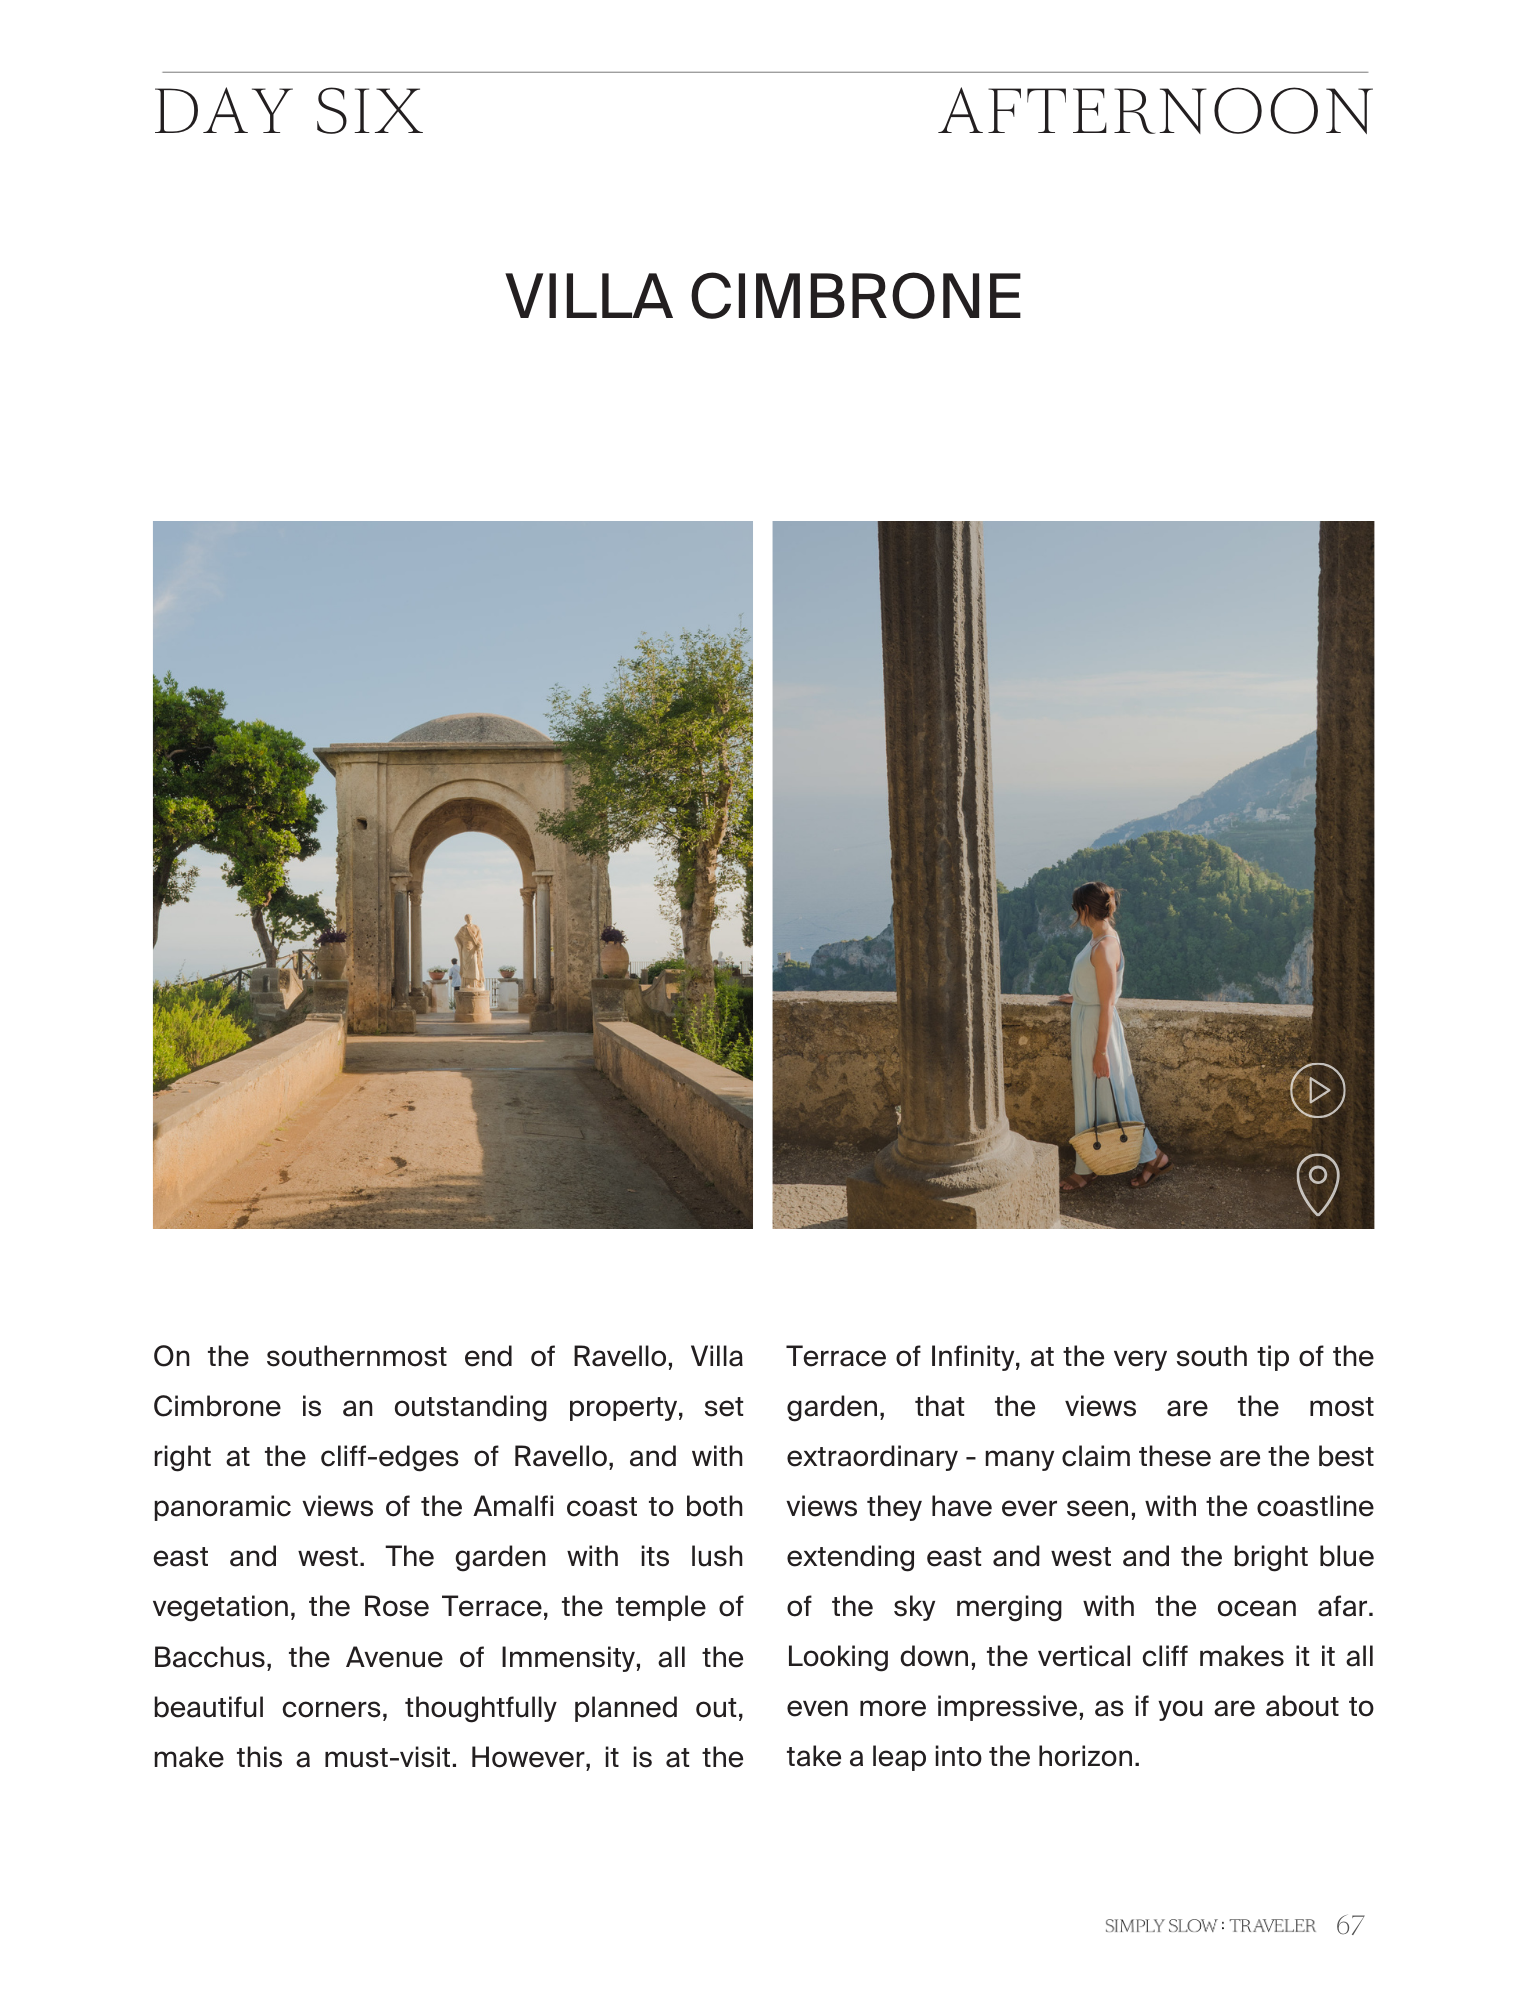 A Guide to the Amalfi Coast - page featuring Villa Cimbrone, in Ravello, by Simply Slow Traveler